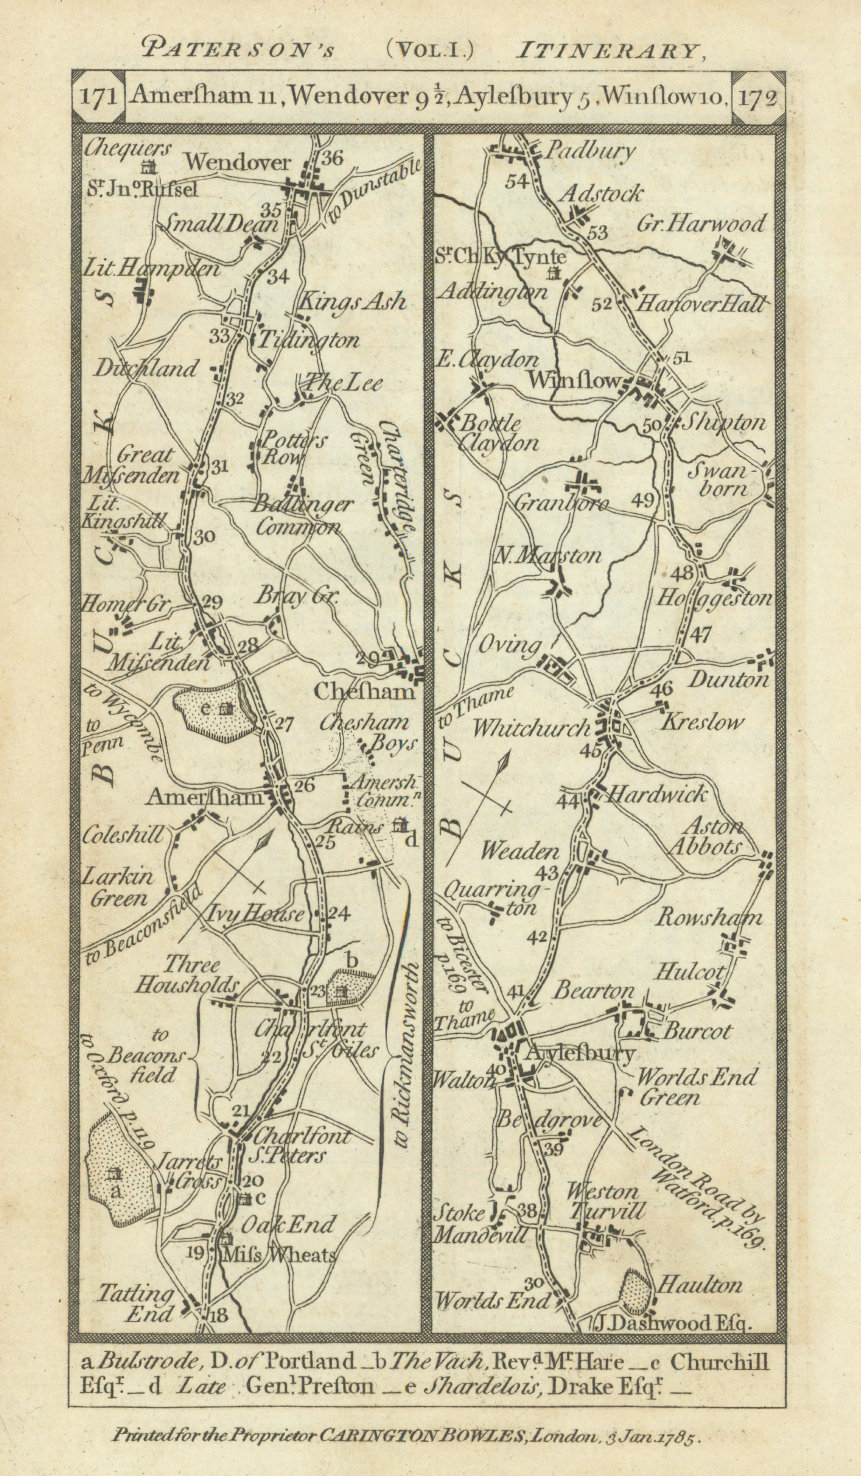 Chalfonts-Amersham-Wendover-Aylesbury-Winslow road strip map PATERSON 1785